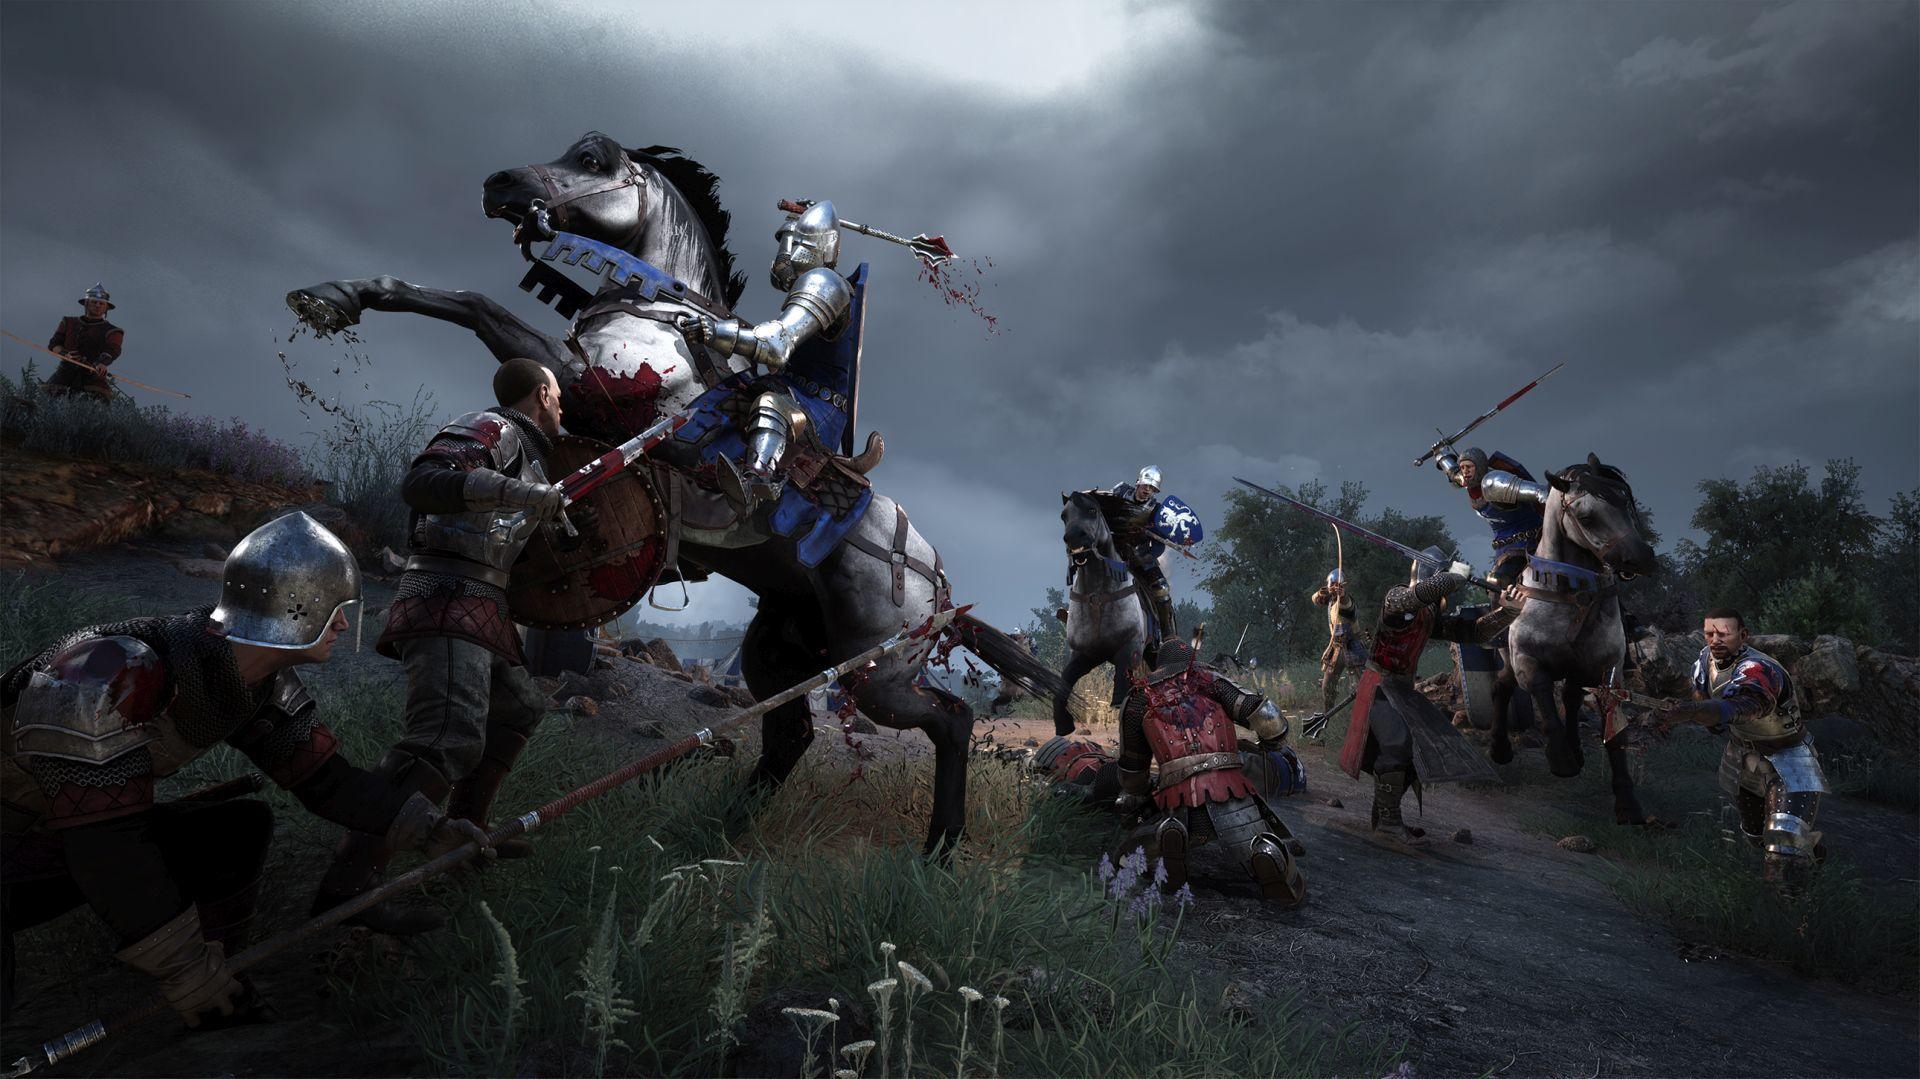 E3 2019: Chivalry 2 Announced With Trailer, Releases In 2020